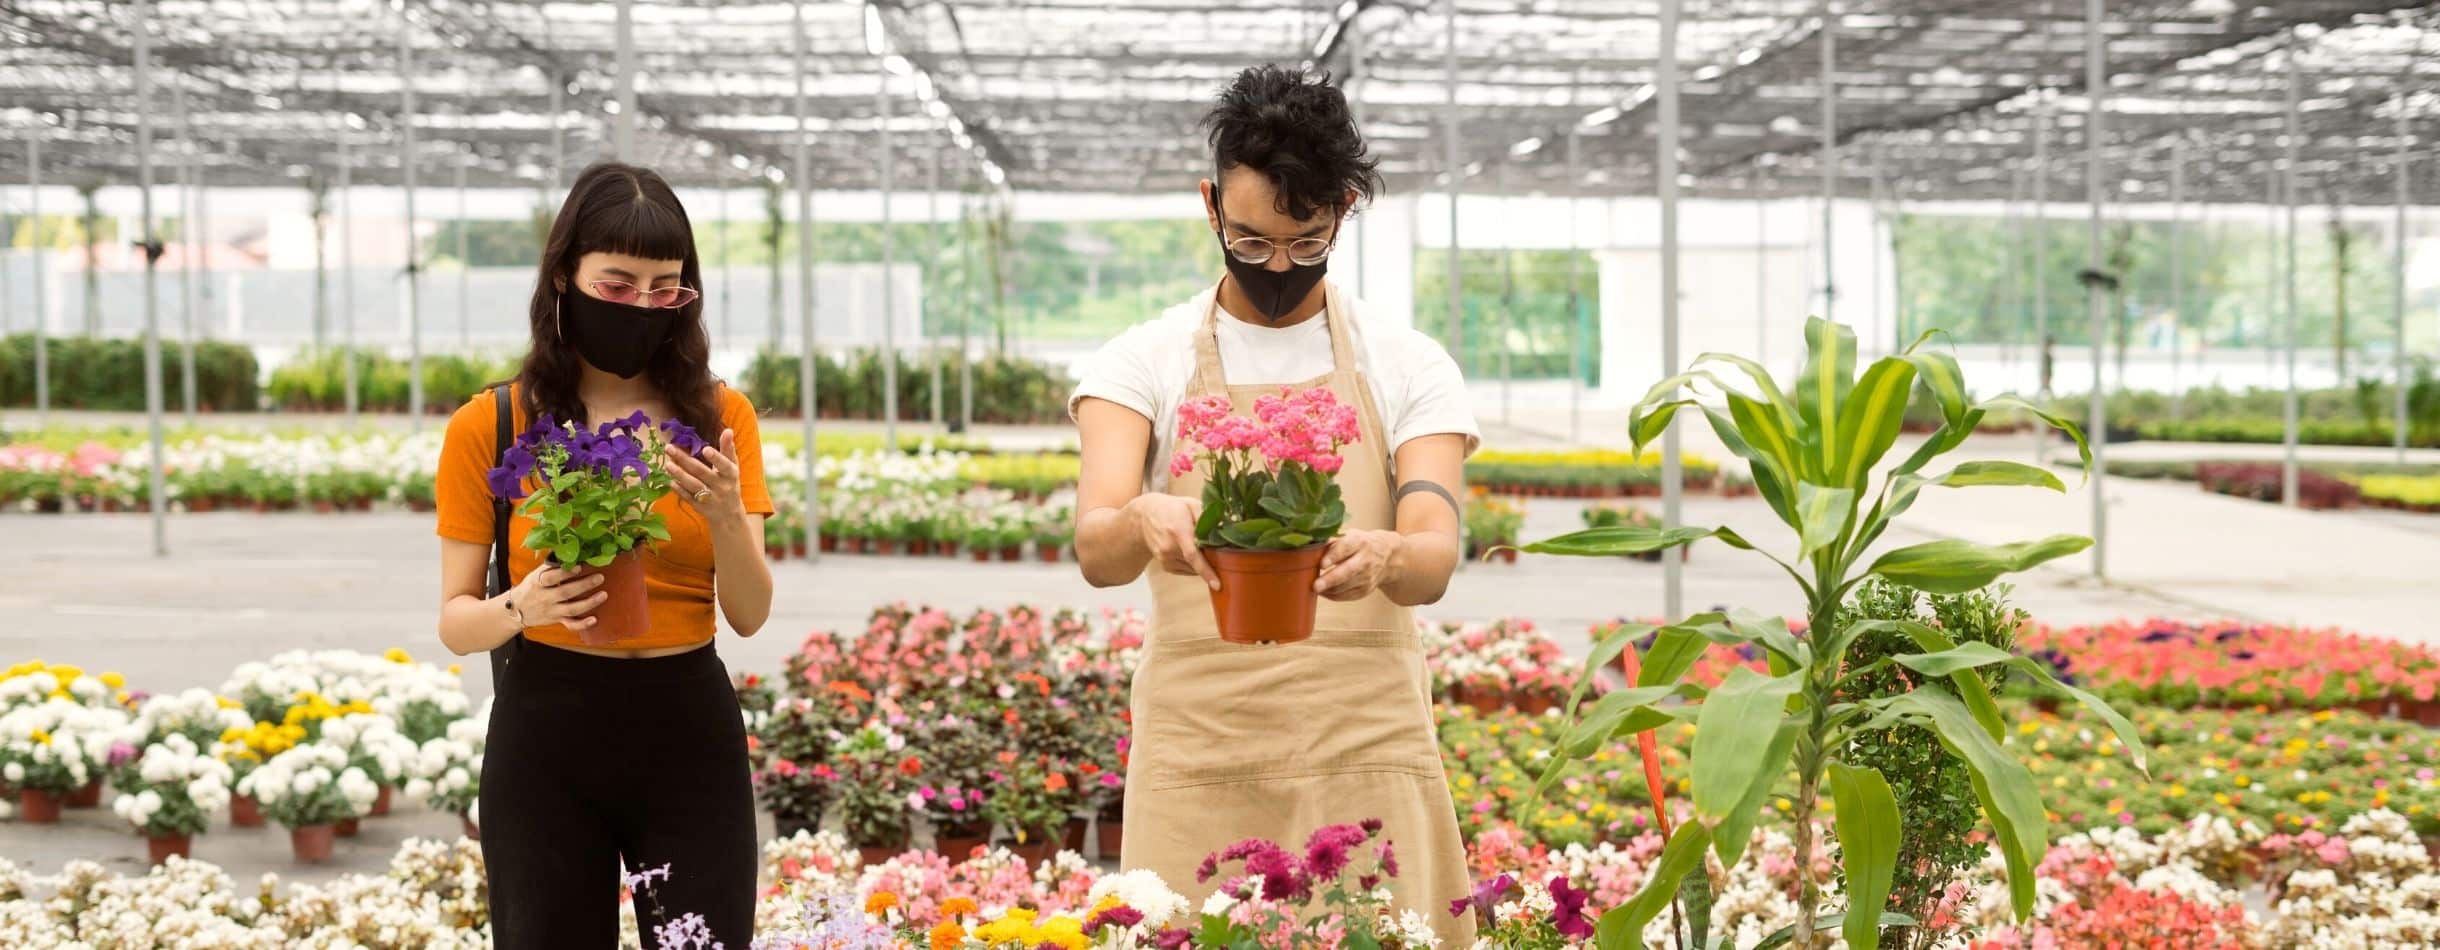 a customer and a worker at a flowerhouse inspect plants